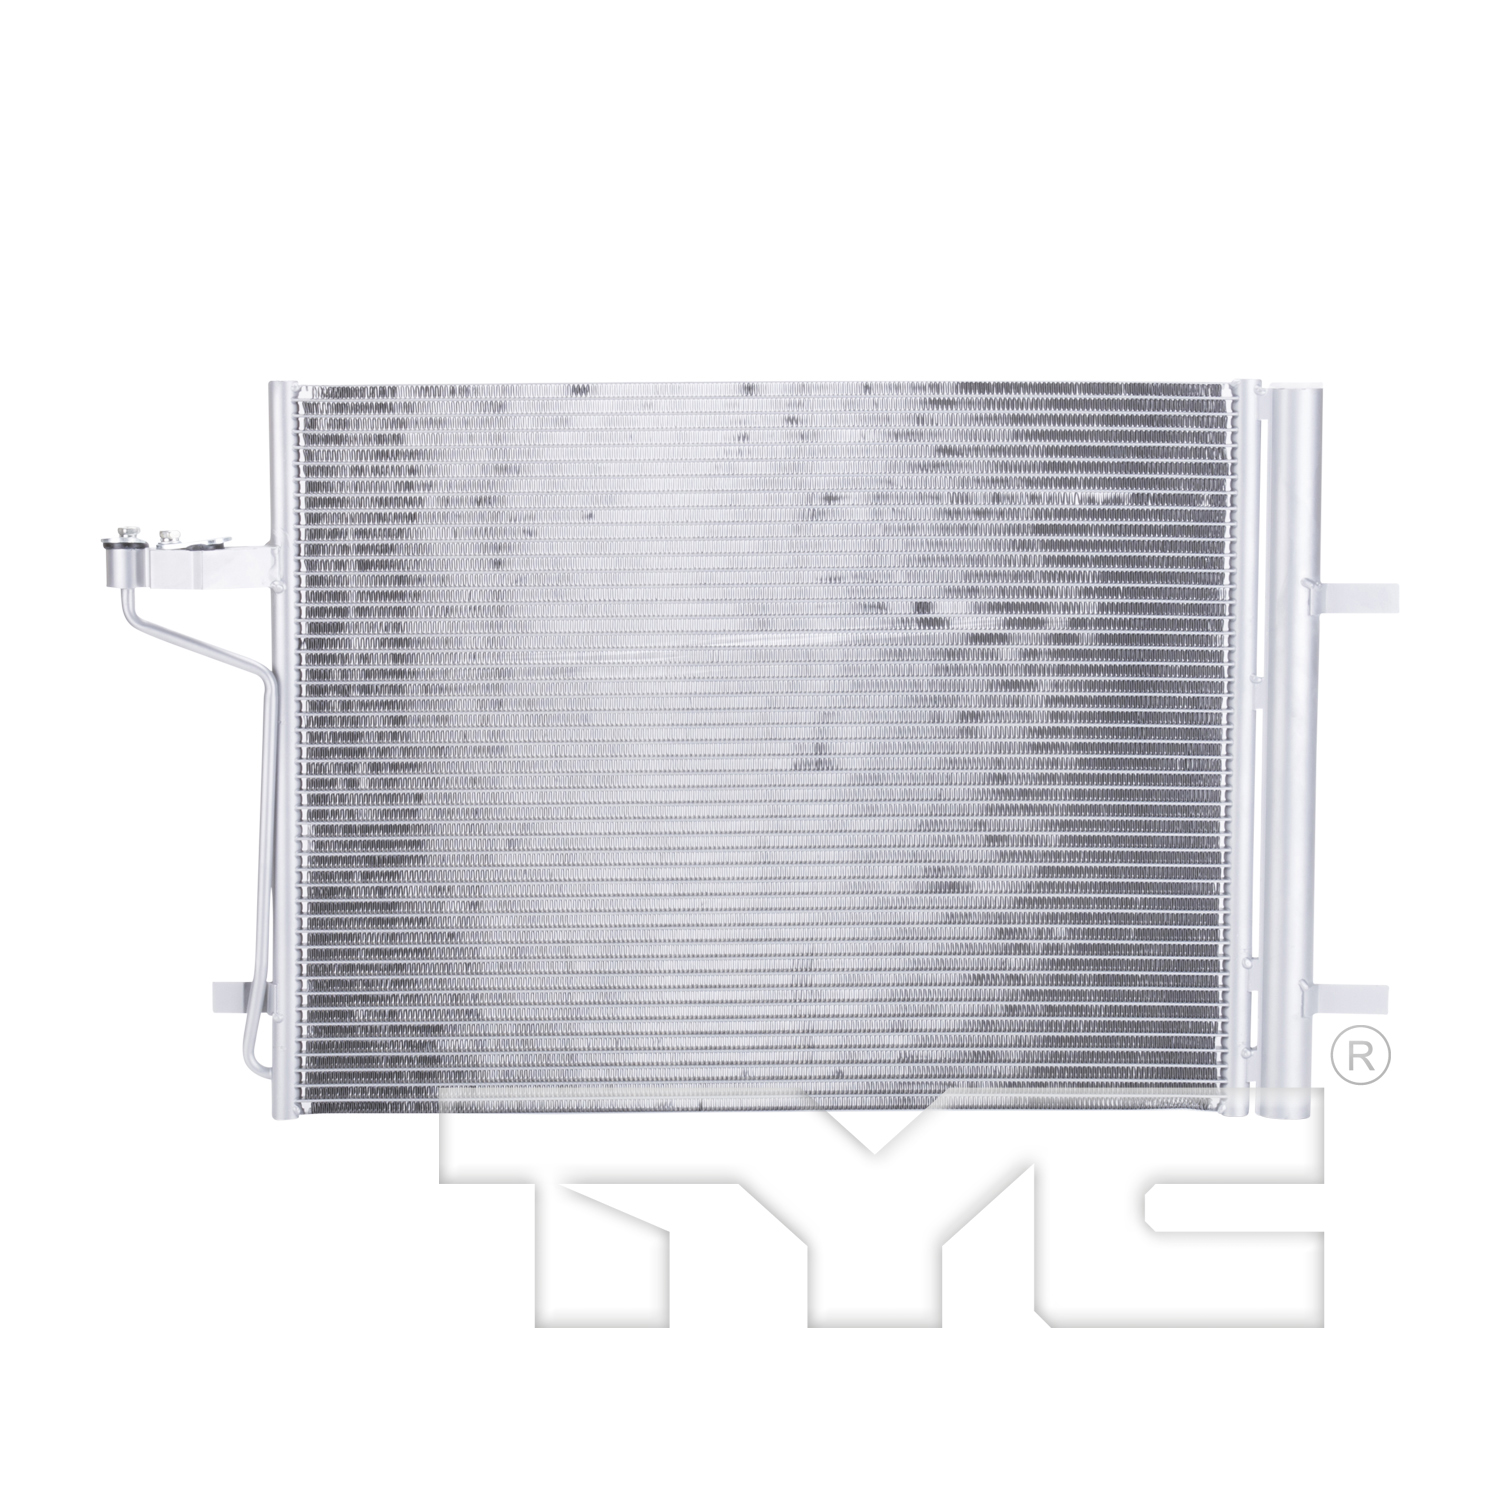 Aftermarket AC CONDENSERS for FORD - C-MAX, C-MAX,13-18,Air conditioning condenser